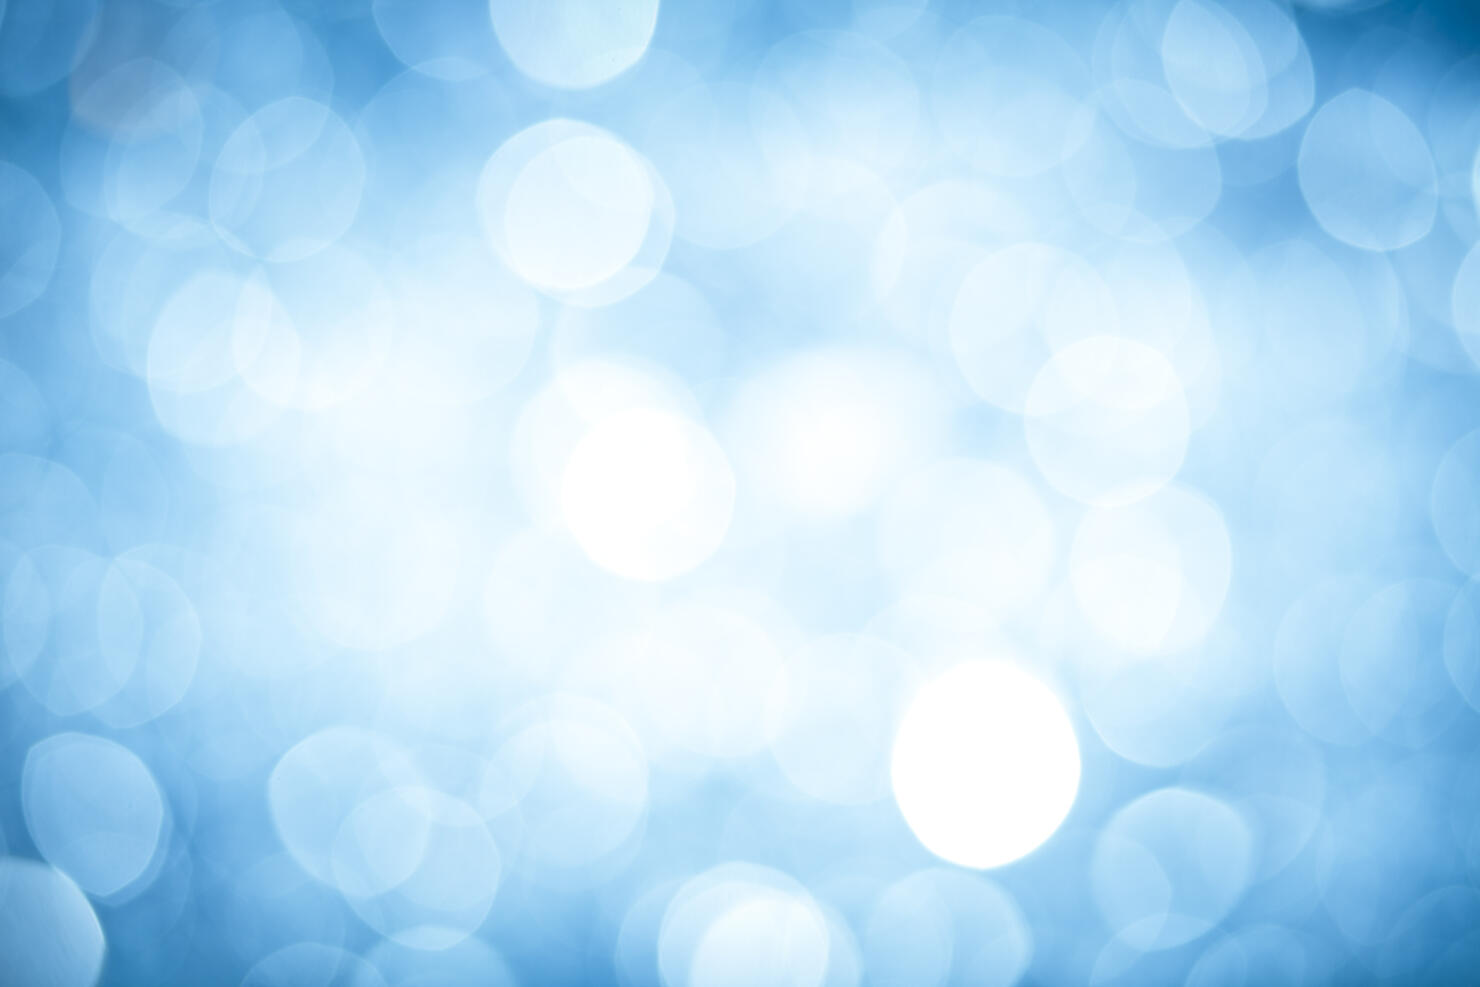 Abstract background with blurred blue sparkles